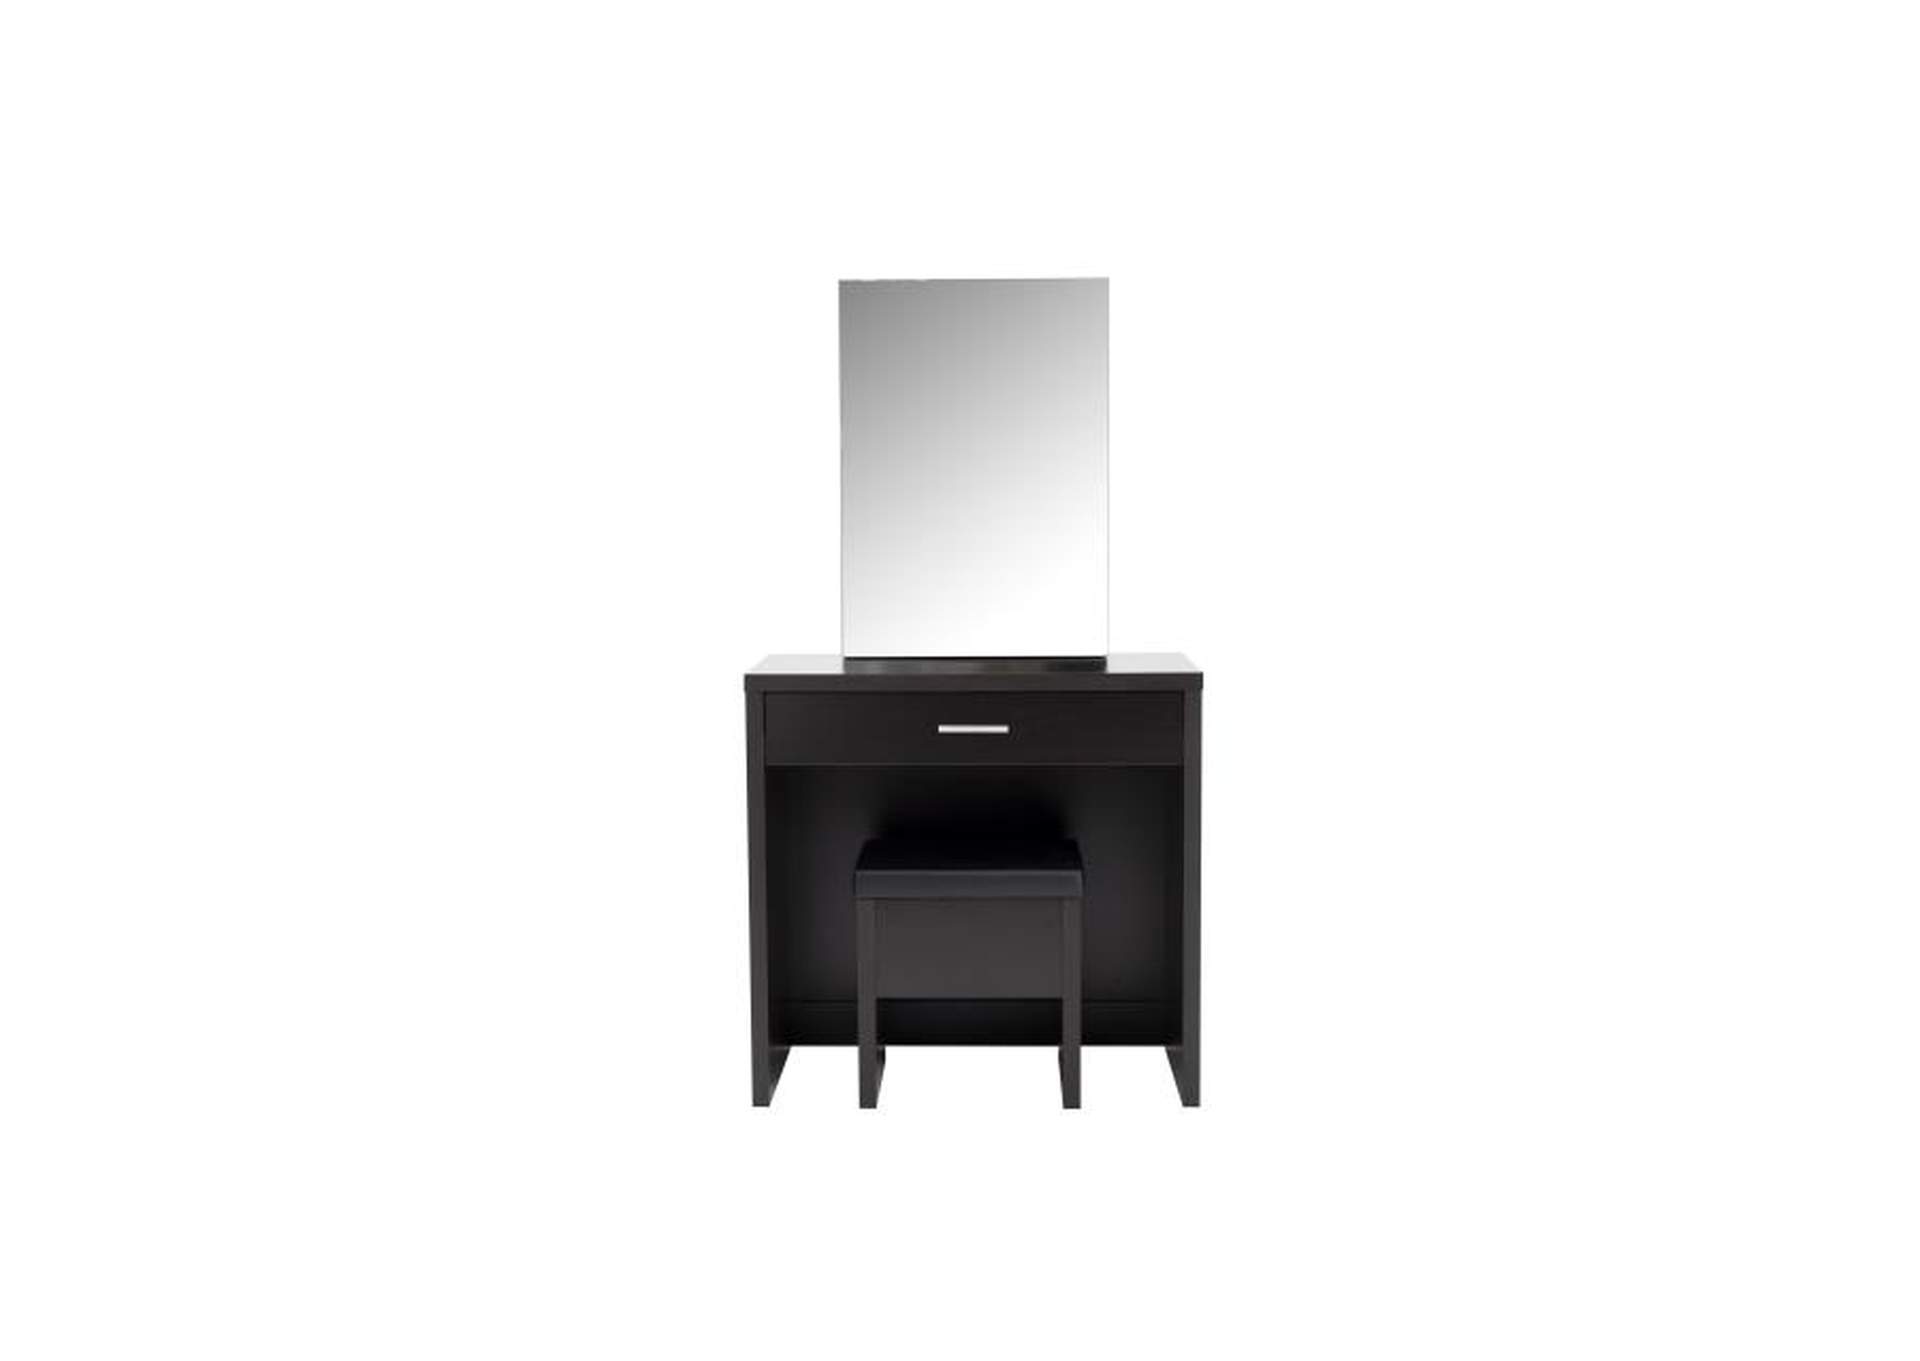 Harvey 2-Piece Vanity Set With Lift-Top Stool Cappuccino,Coaster Furniture